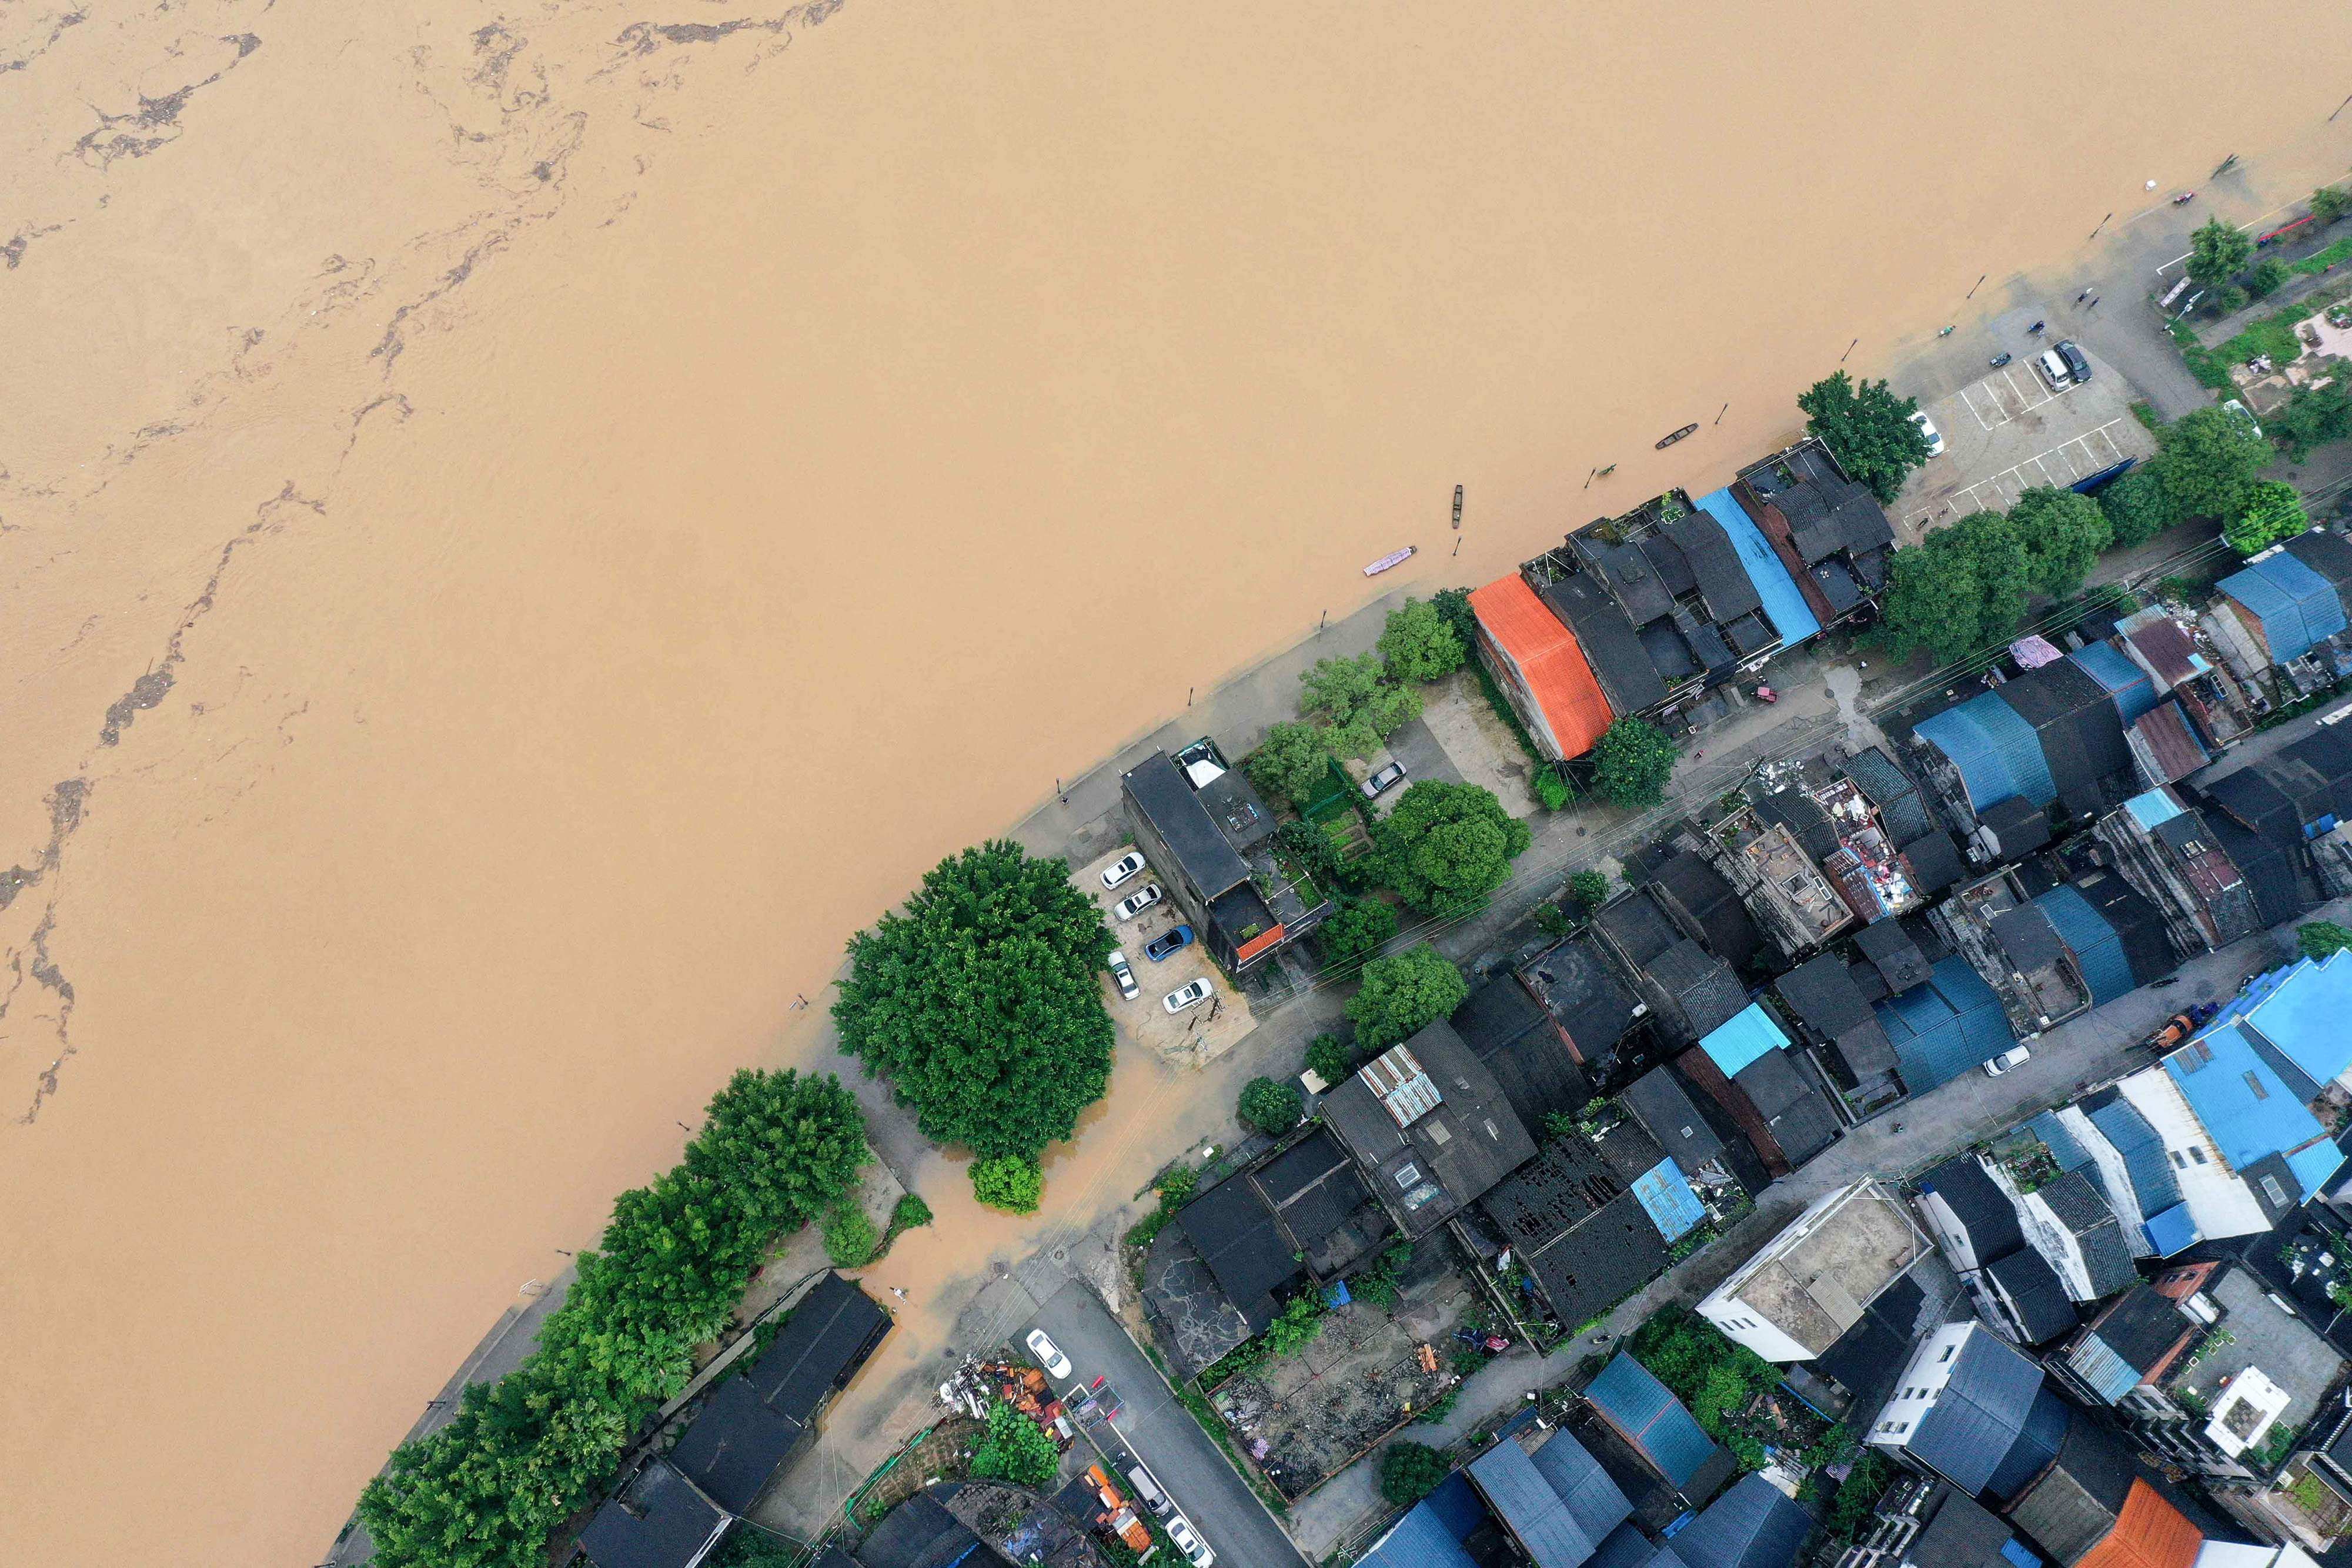 A flooded street along the swollen Rongjiang river after heavy rains in Rongan, in China’s southern Guangxi region, on July 2. Waves of change are to be expected, but they become unmanageable when they collide to create massive shocks. Climate change driven by economic growth is one example. Photo: AFP